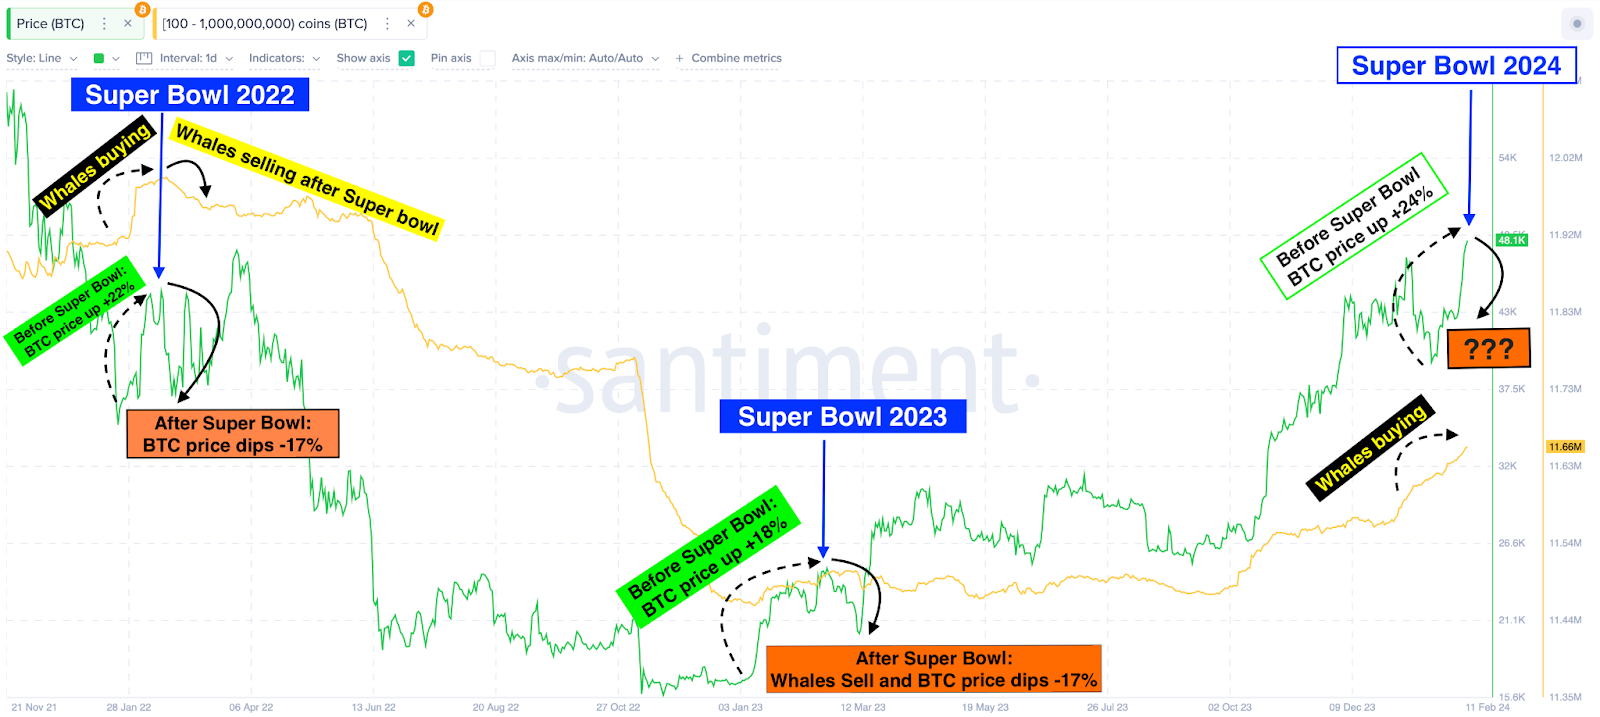 Bitcoin (BTC) price action during and after Super Bowl 2022 to 2024